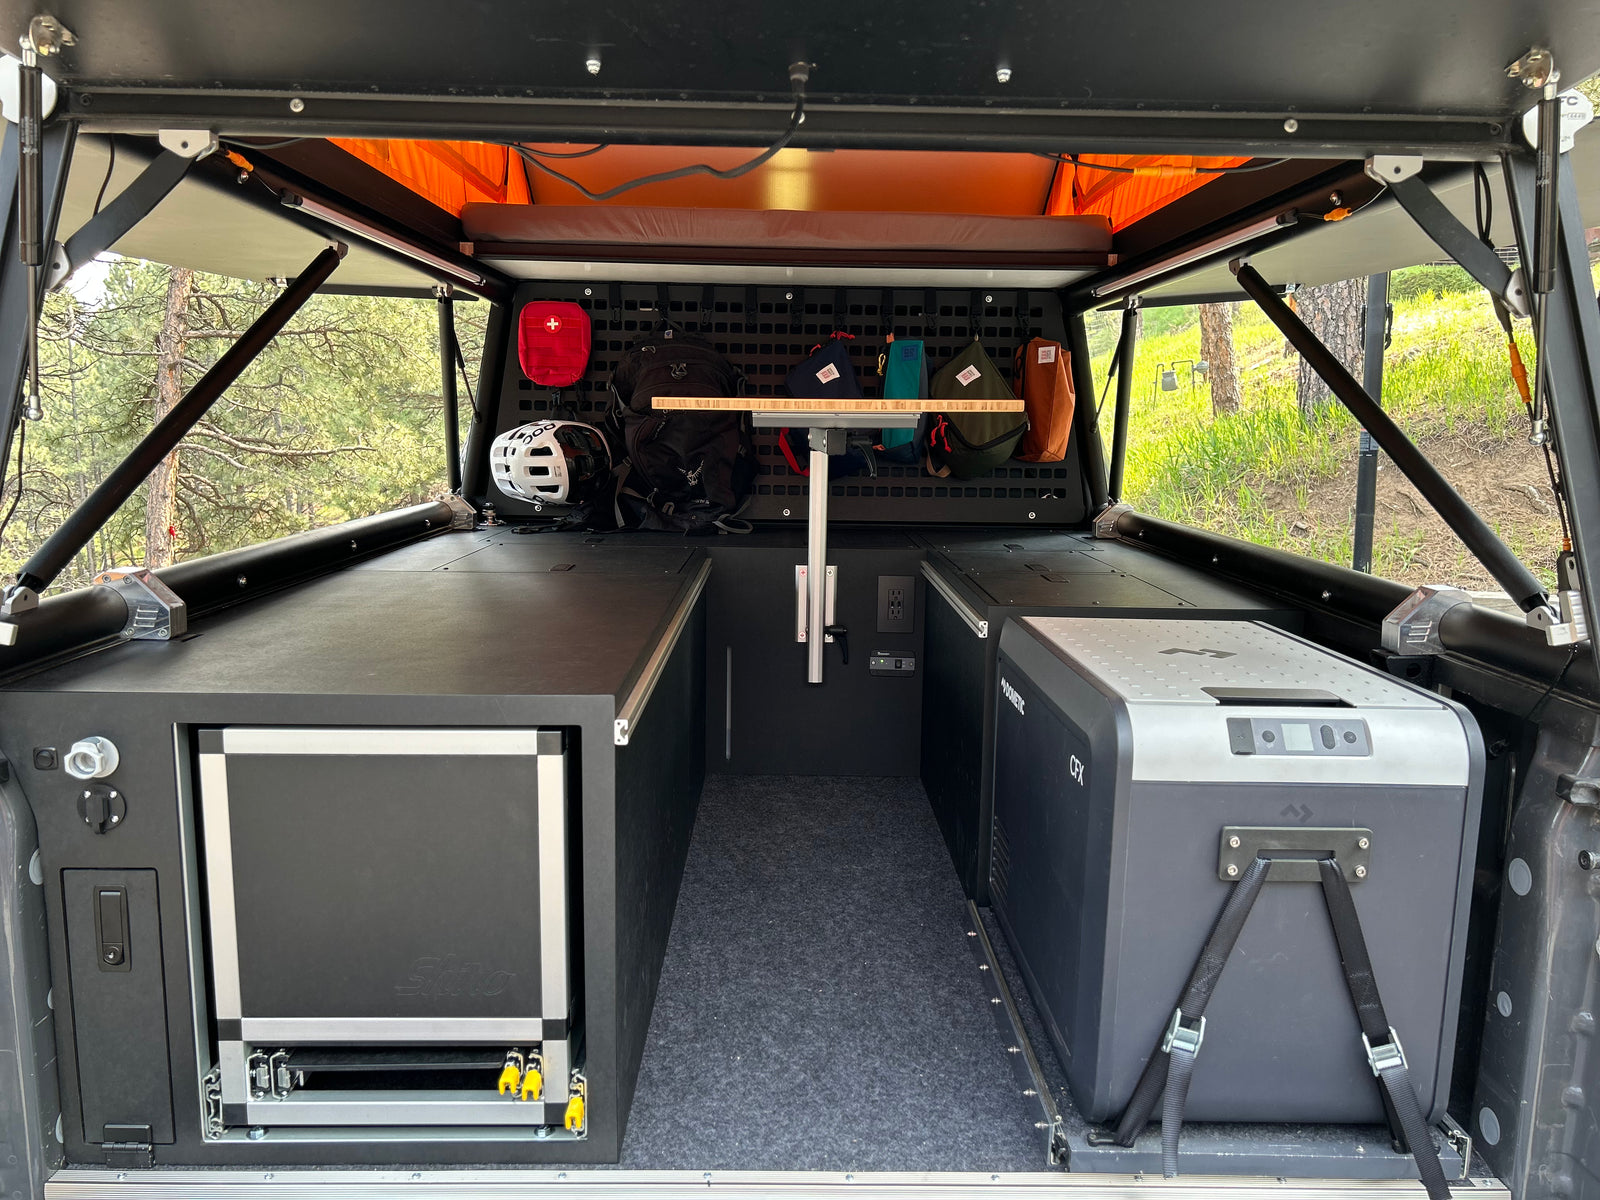 Go Fast Camper (GFC) build - Interior storage cabinets view with camp kitchen and slide out refrigerator